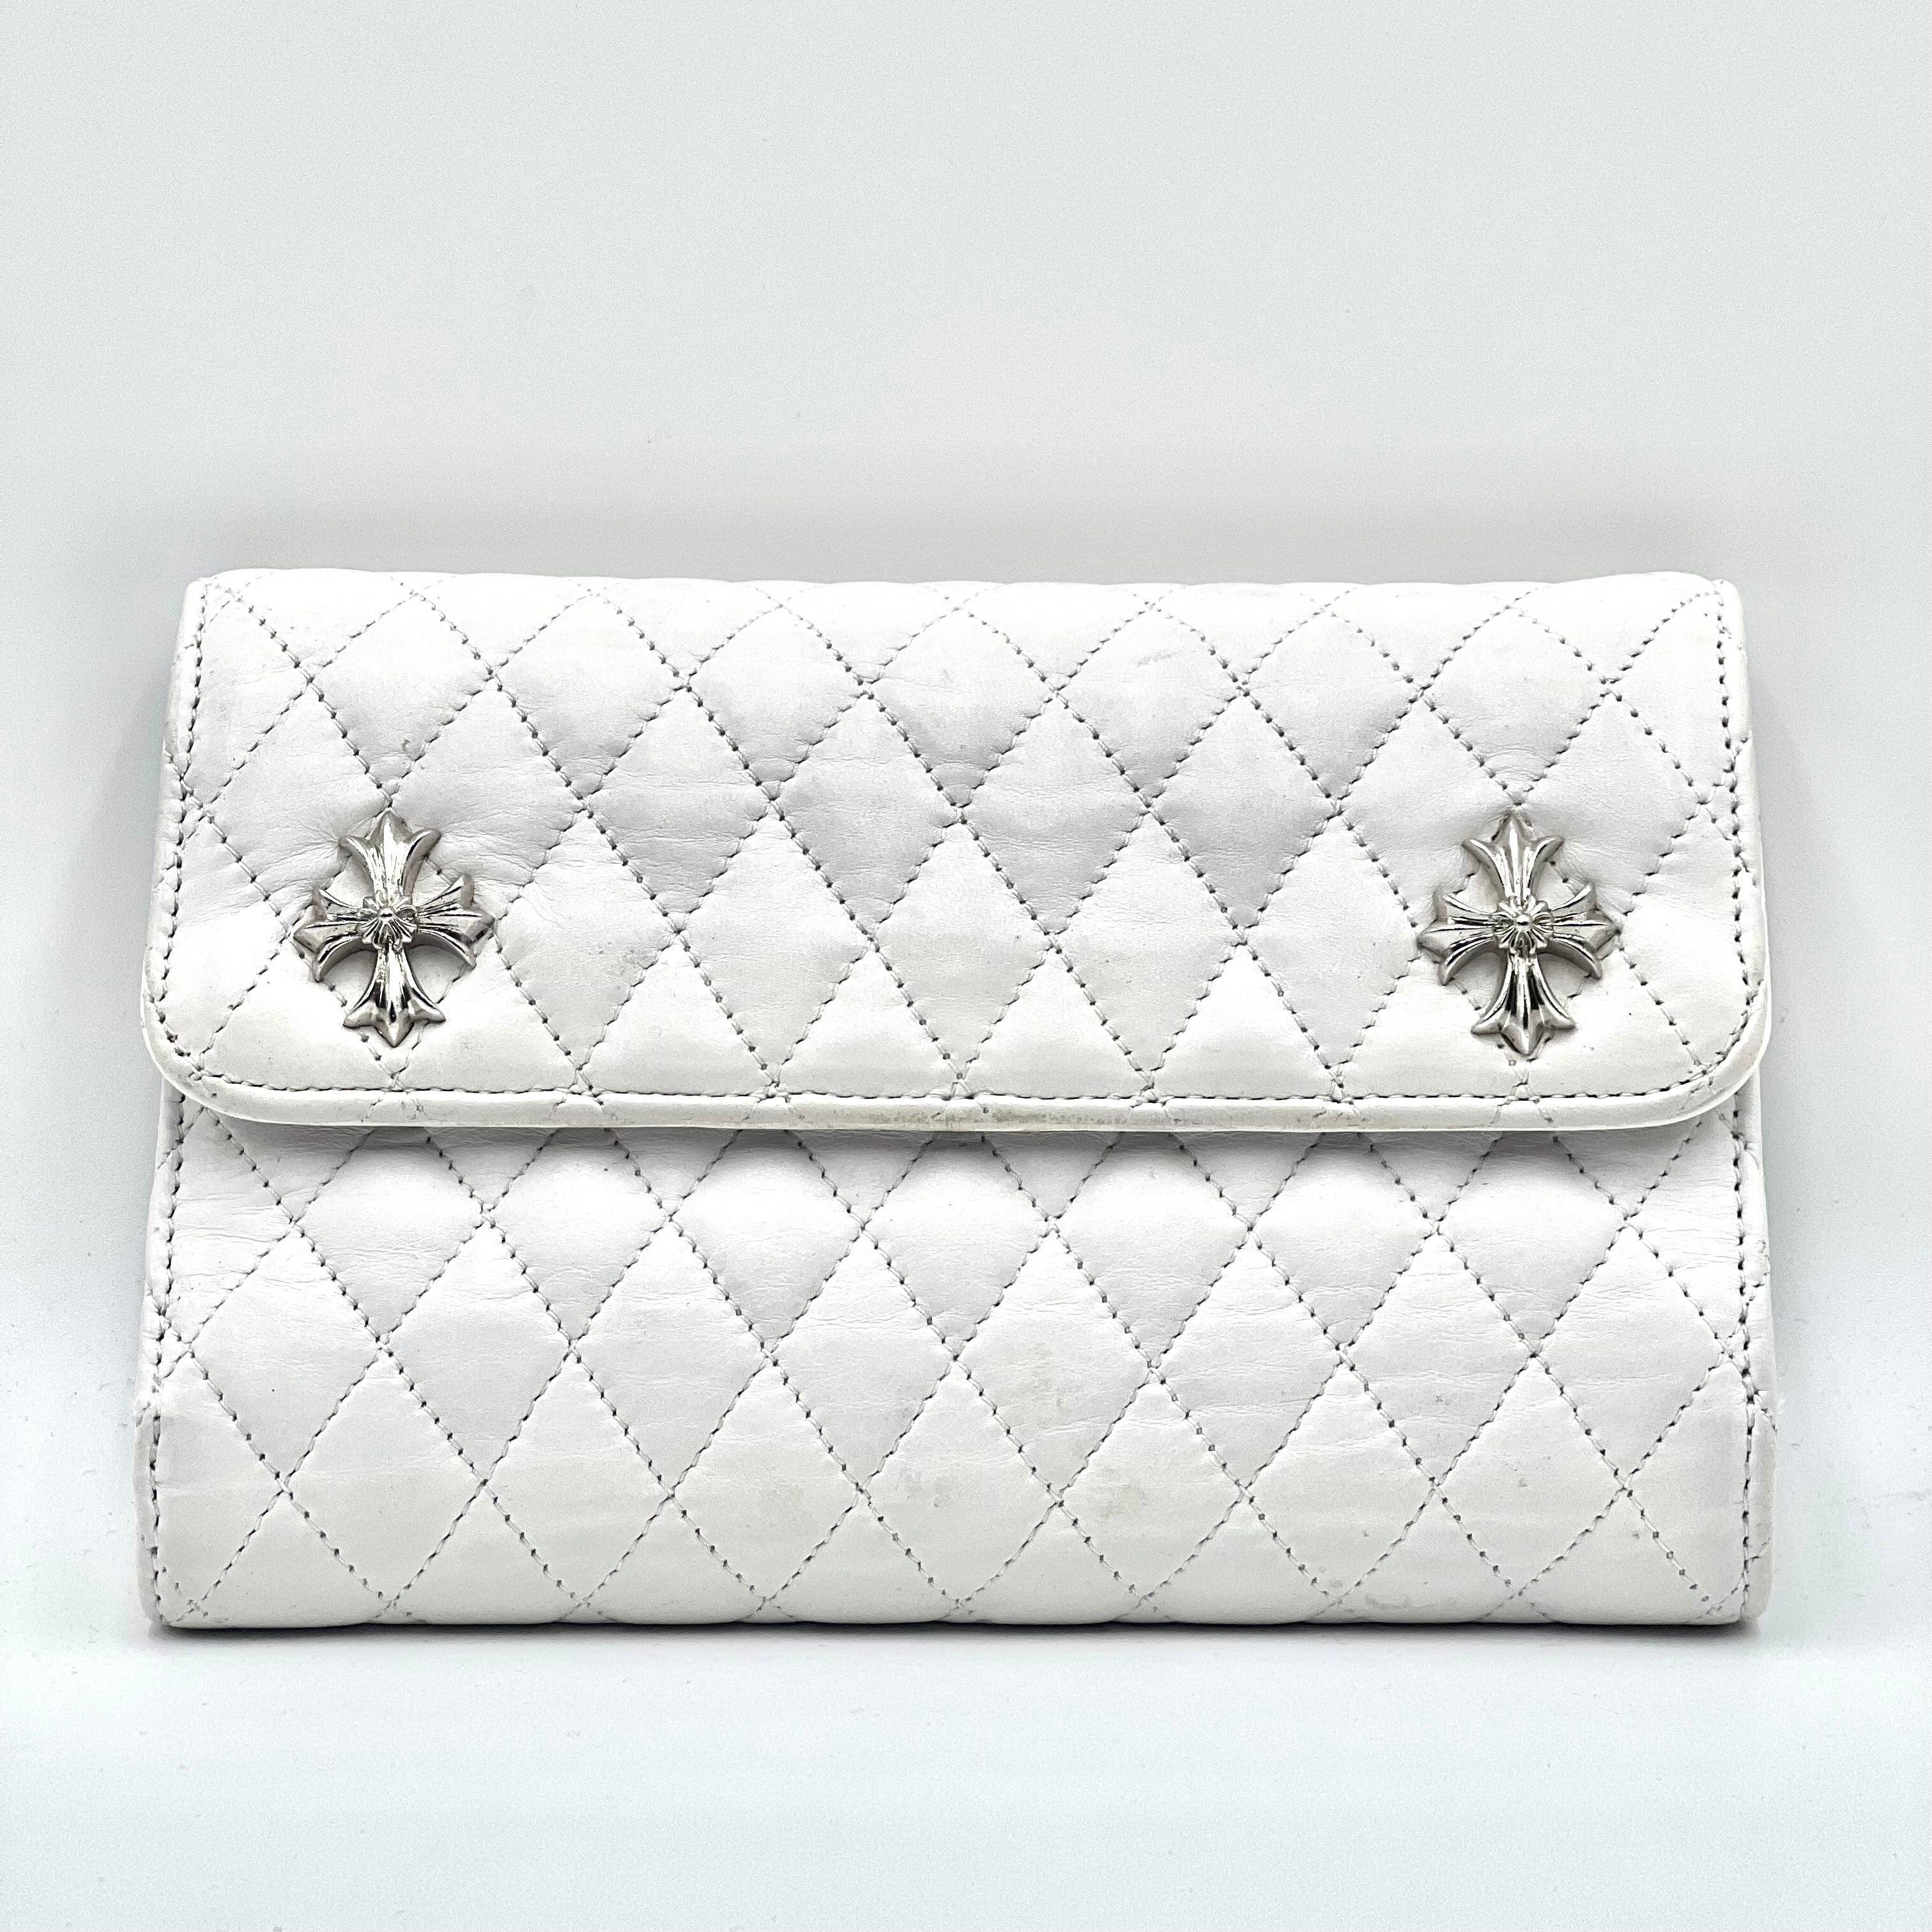 Lambskin Clutch Extra Large Wallet White